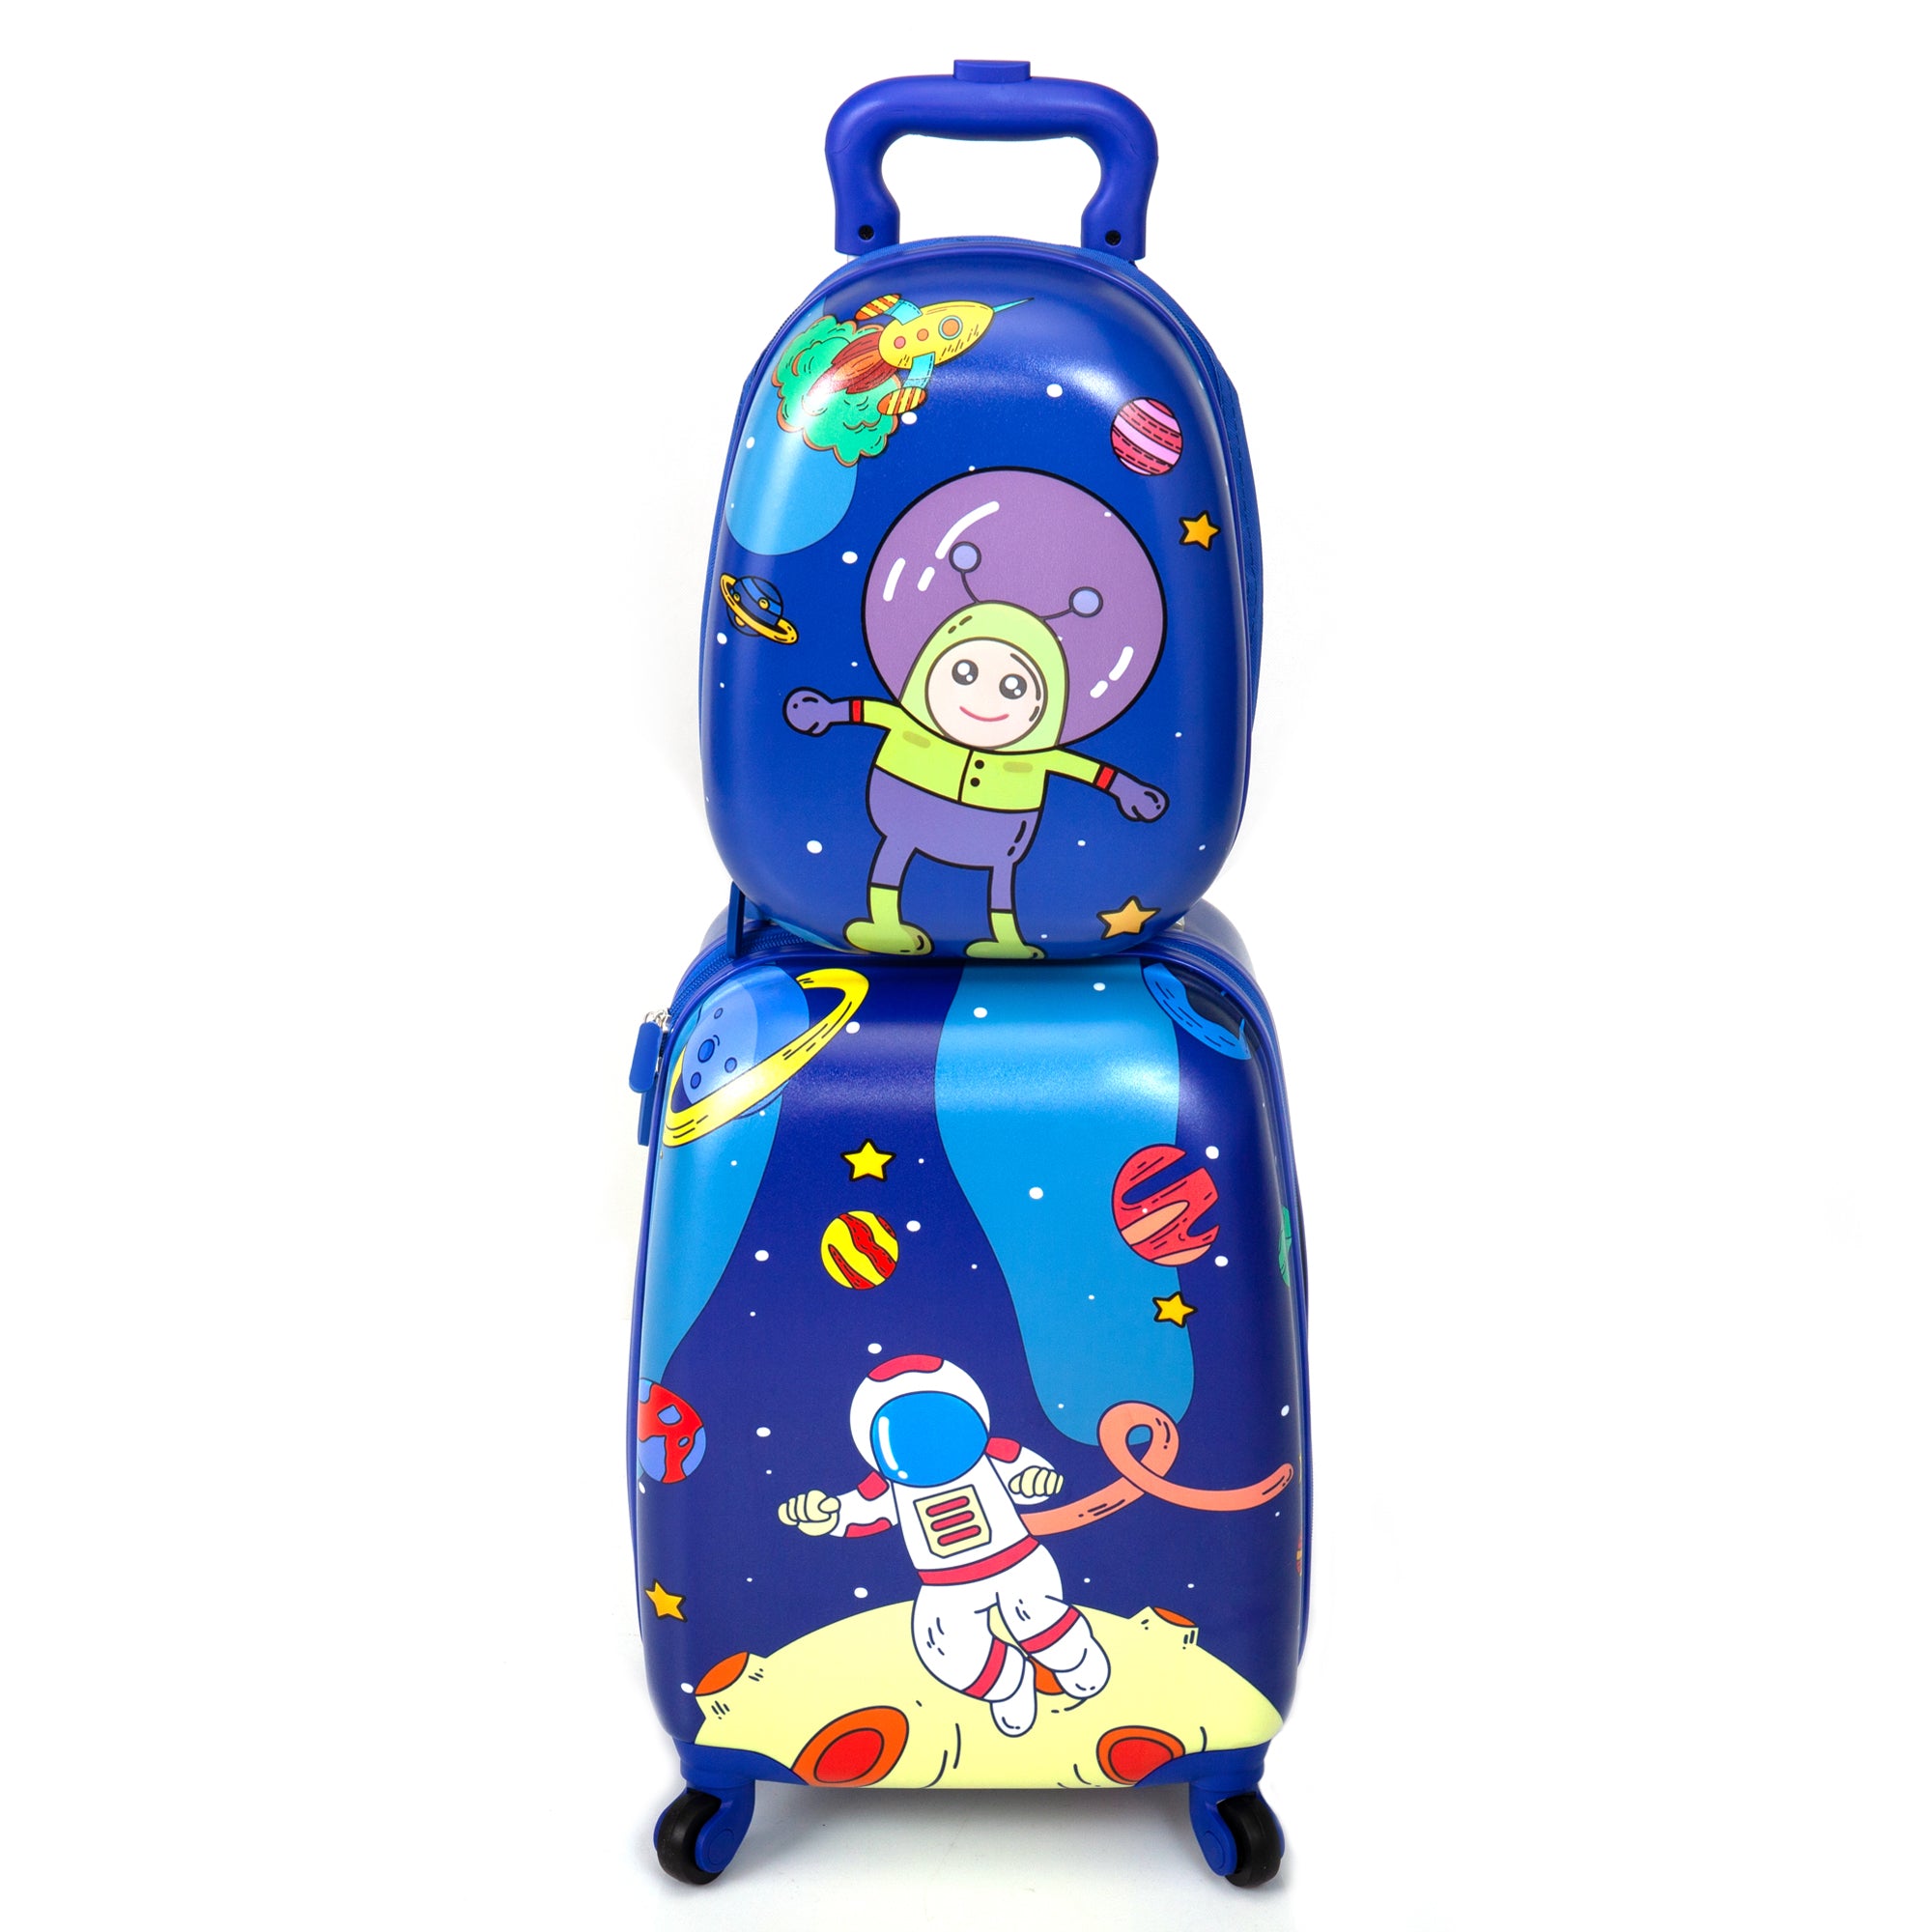 2 PCS Kids Luggage Set, 12" Backpack and 16" Spinner blue-abs+pc